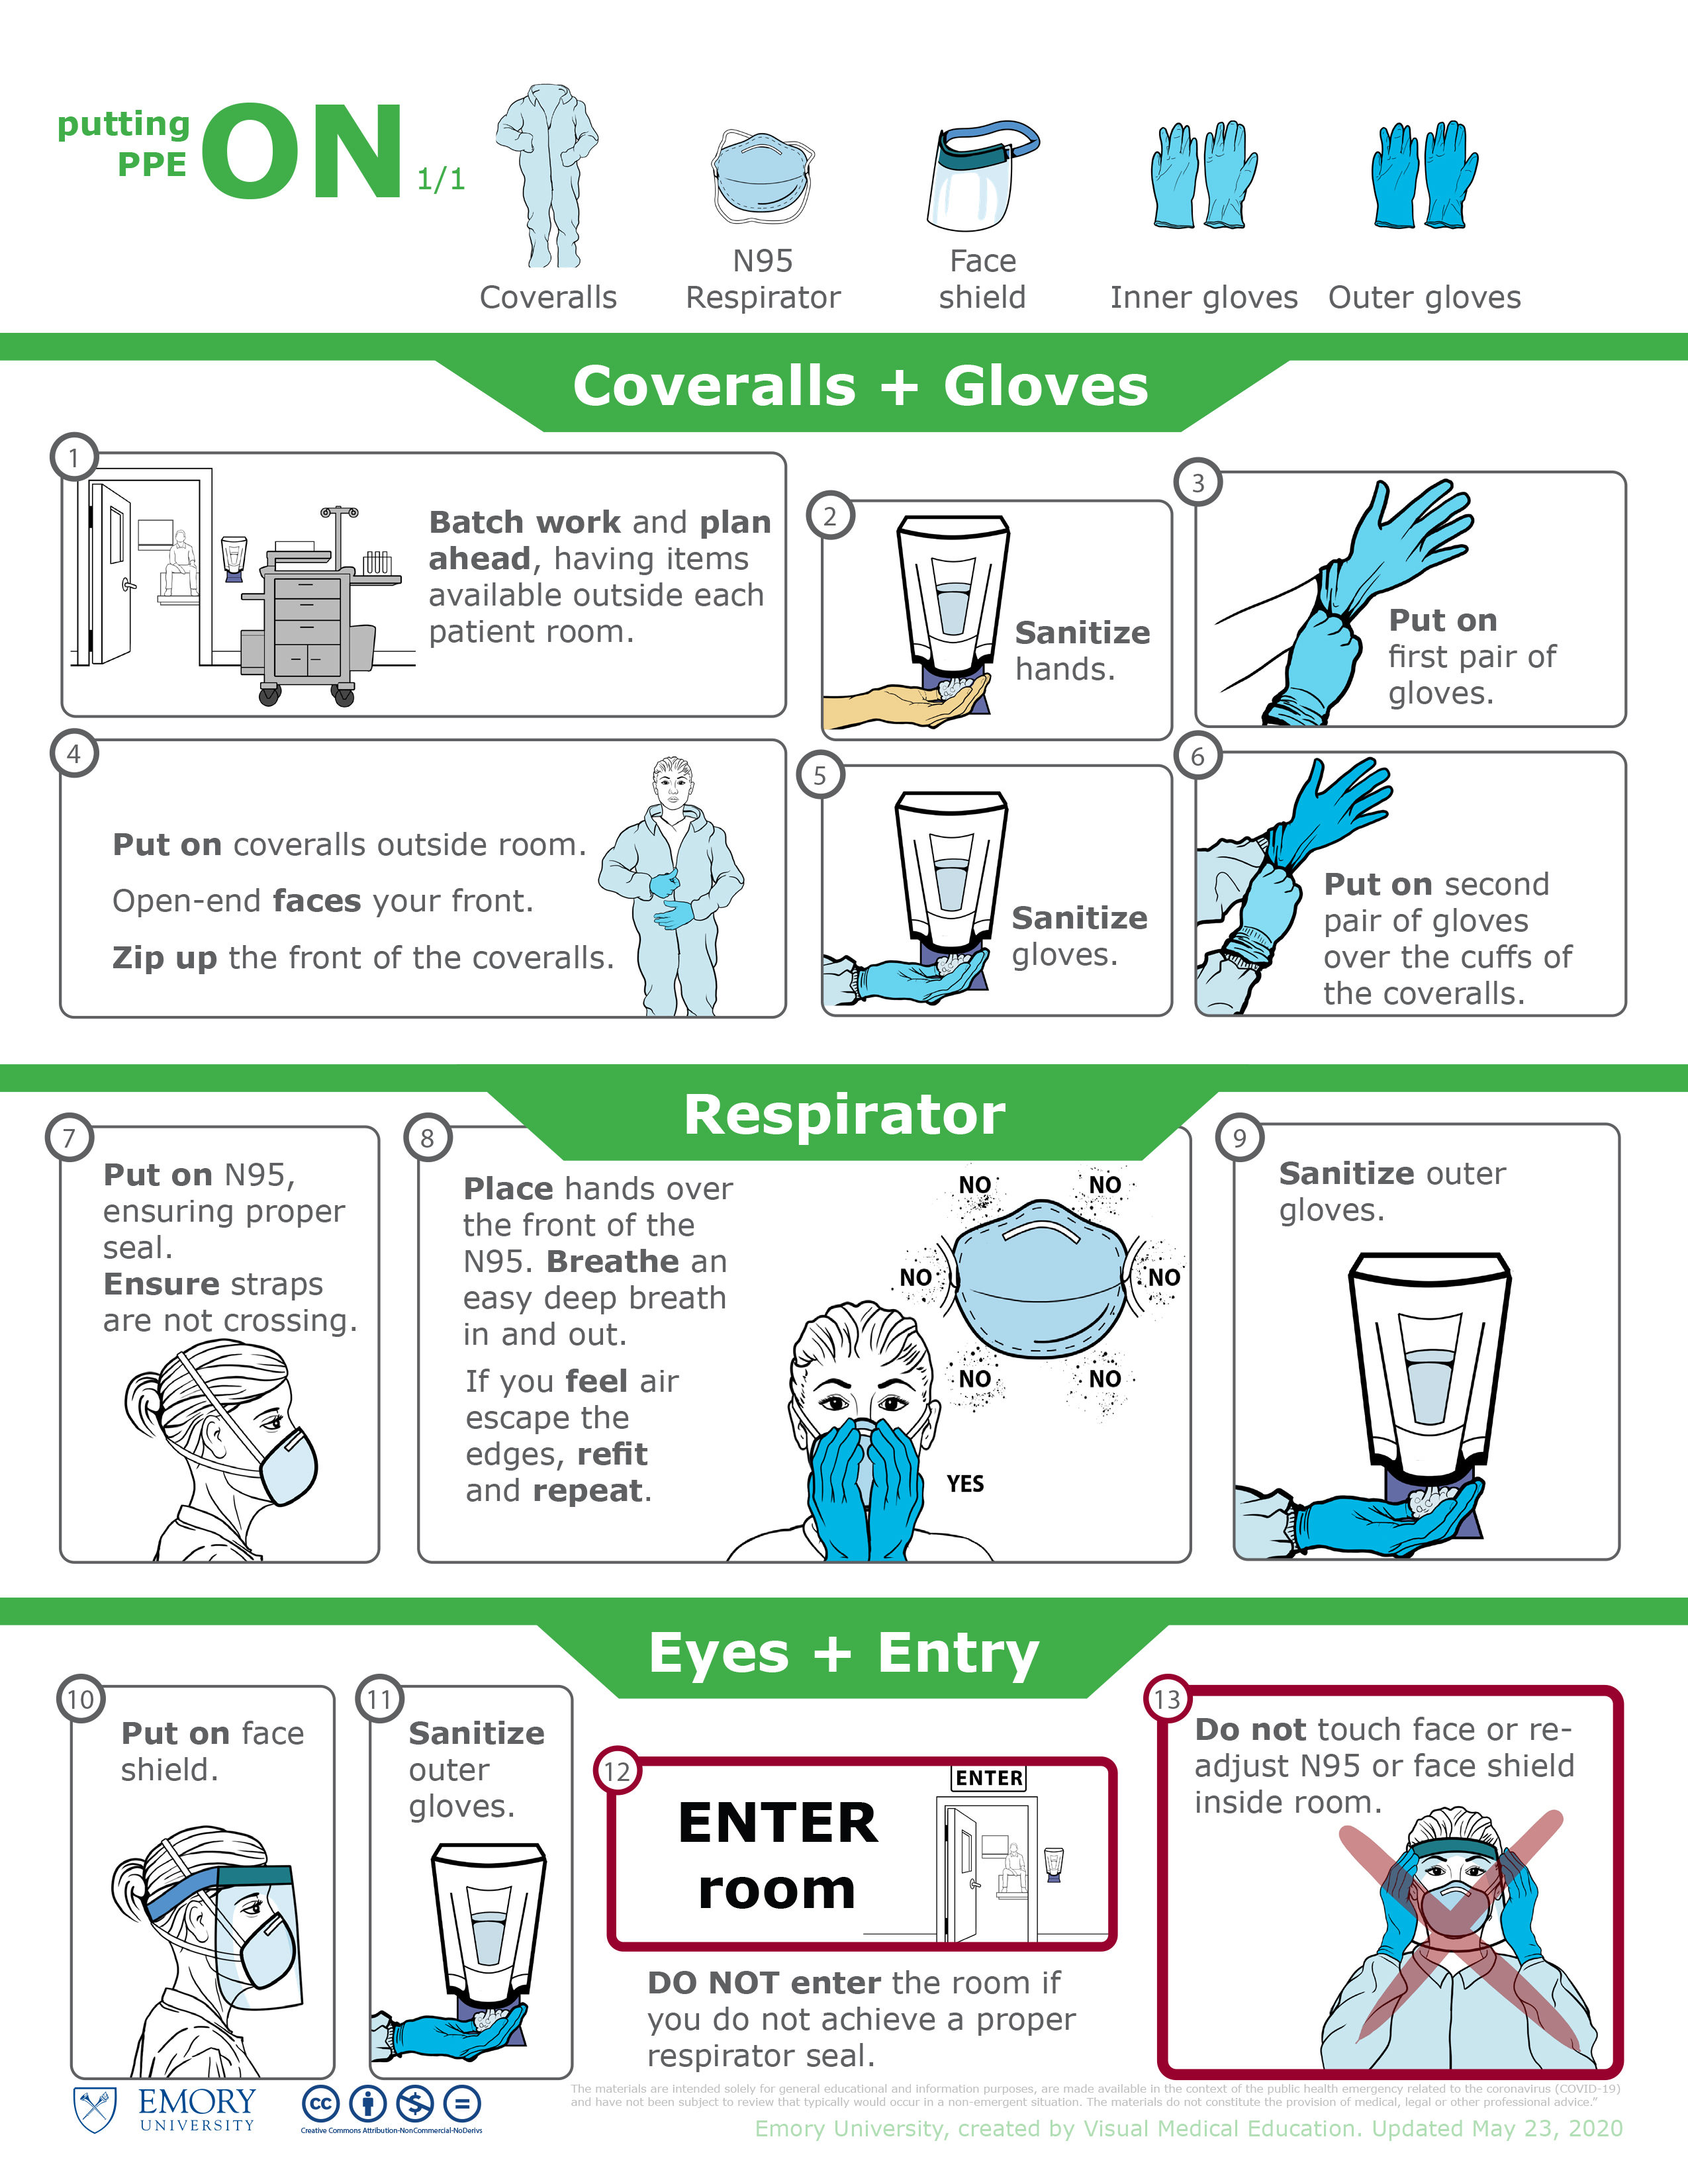 Putting PPE ON:  Illustrated handout that was used to instruct clinical staff in the process of safely putting on personal protective equipment. (donning PPE)